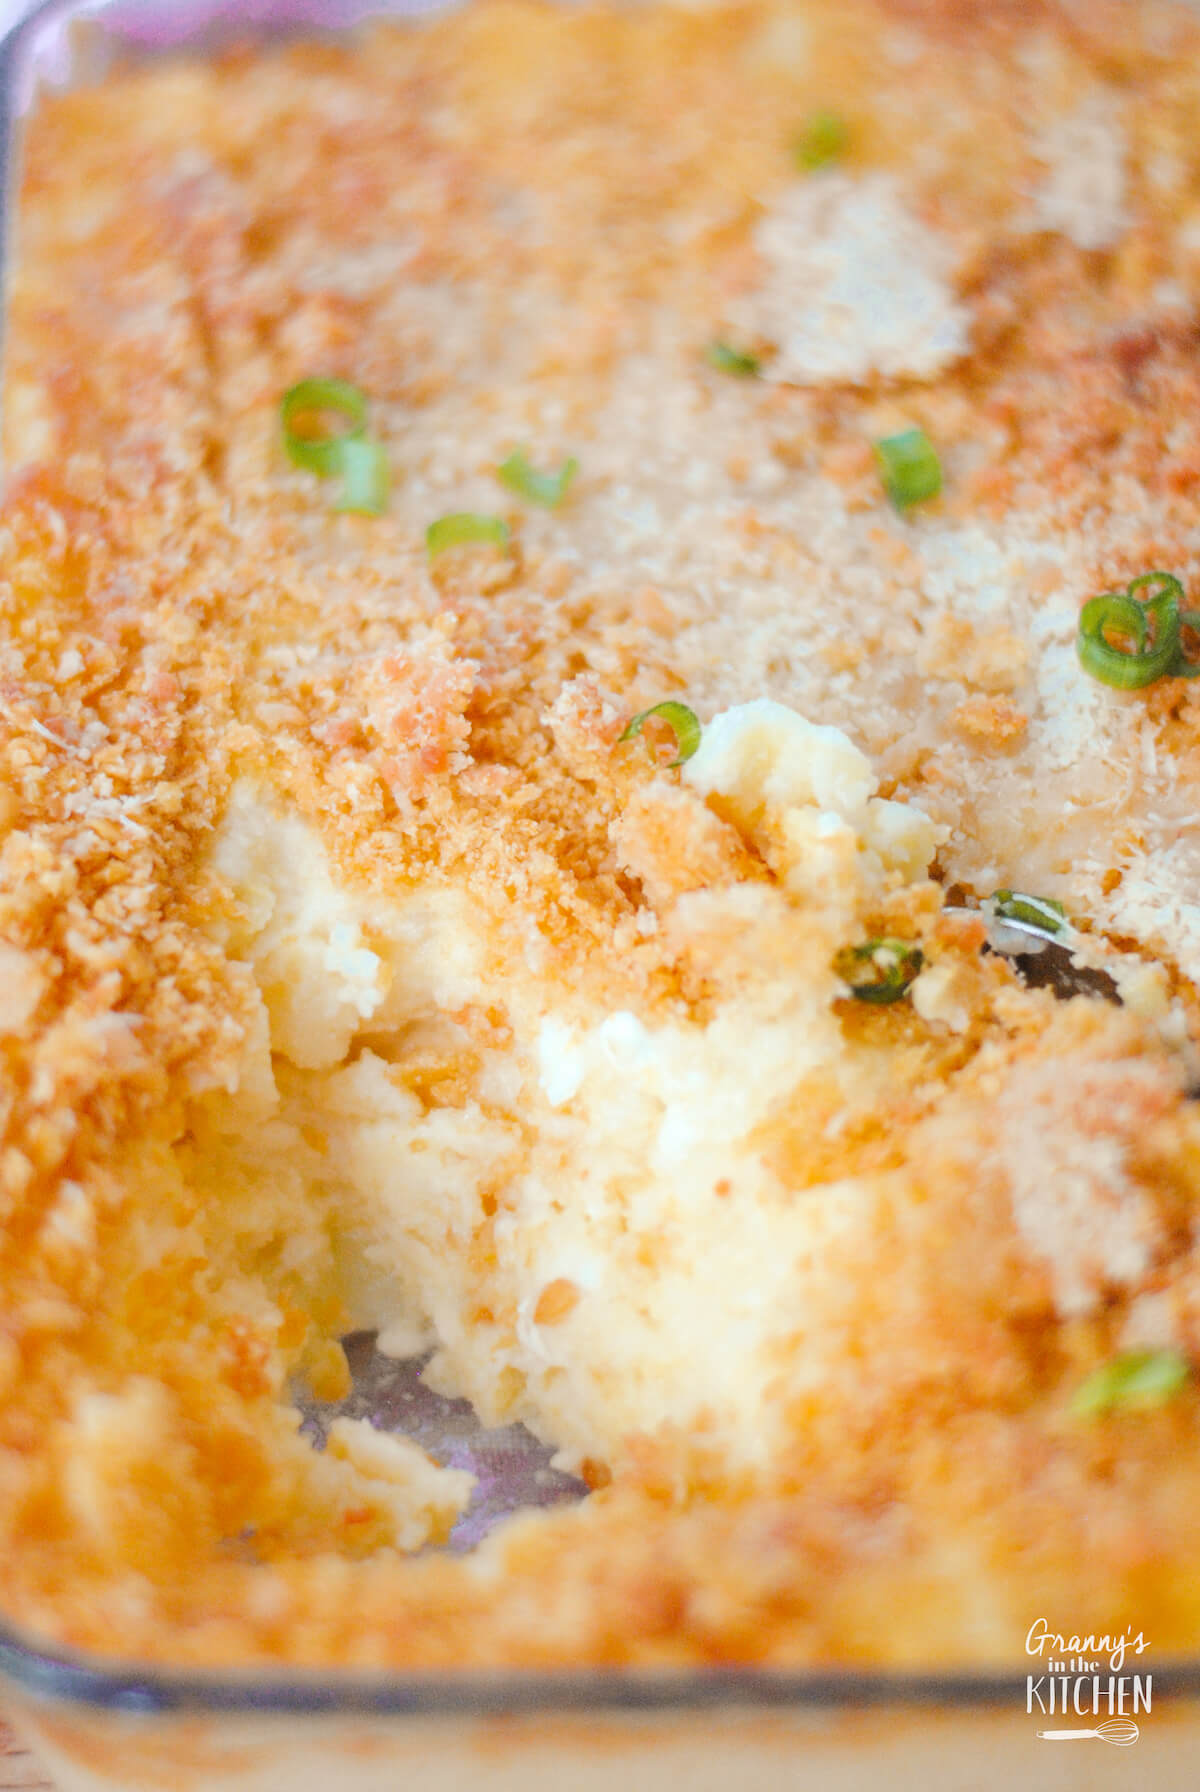 baked mashed potato casserole with a scoop missing.